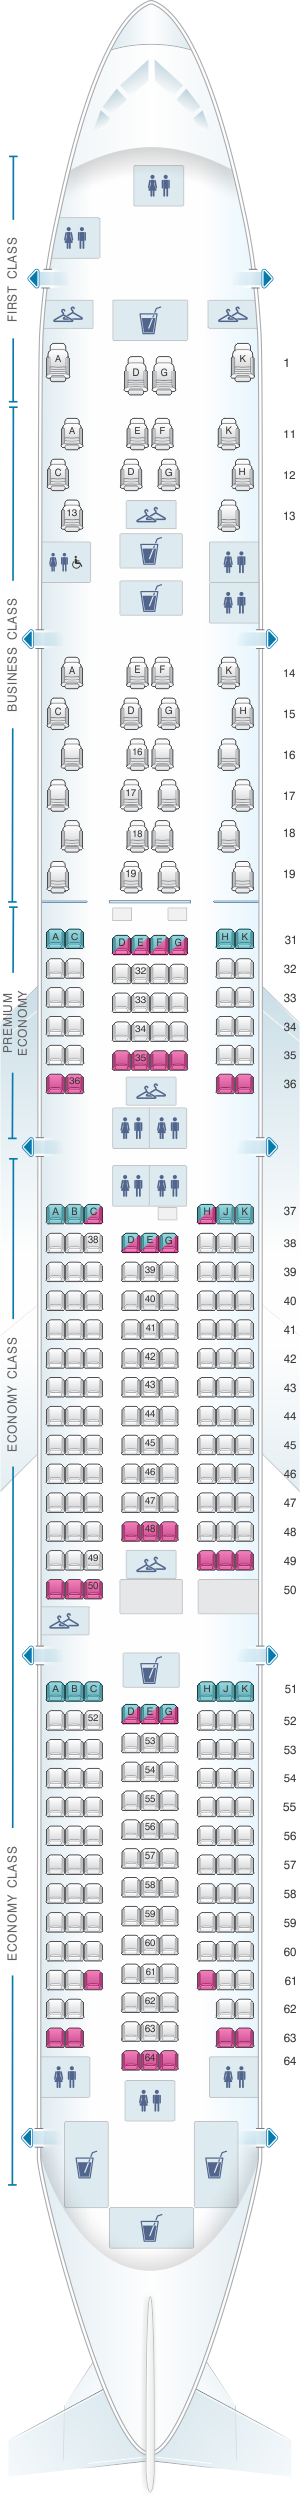 Seat Map China Southern Airlines Boeing B777 300ER | SeatMaestro